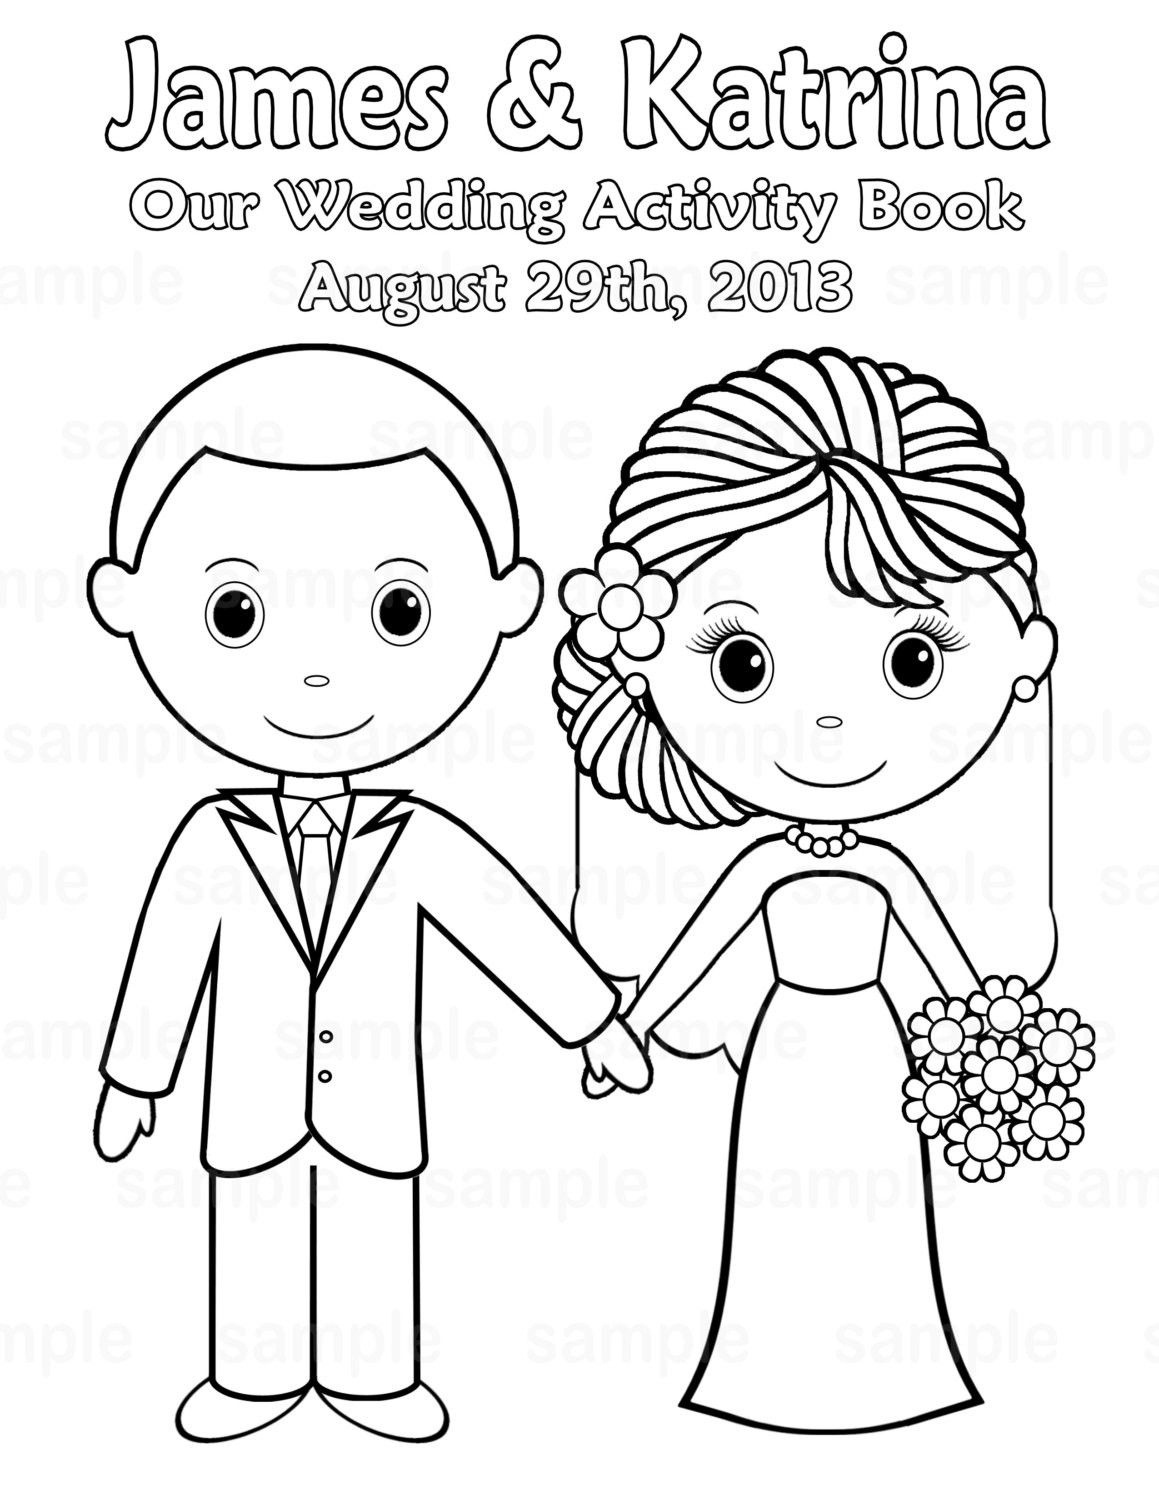 Free Printable Wedding Coloring Pages | Free Printable Wedding - Wedding Coloring Book Free Printable